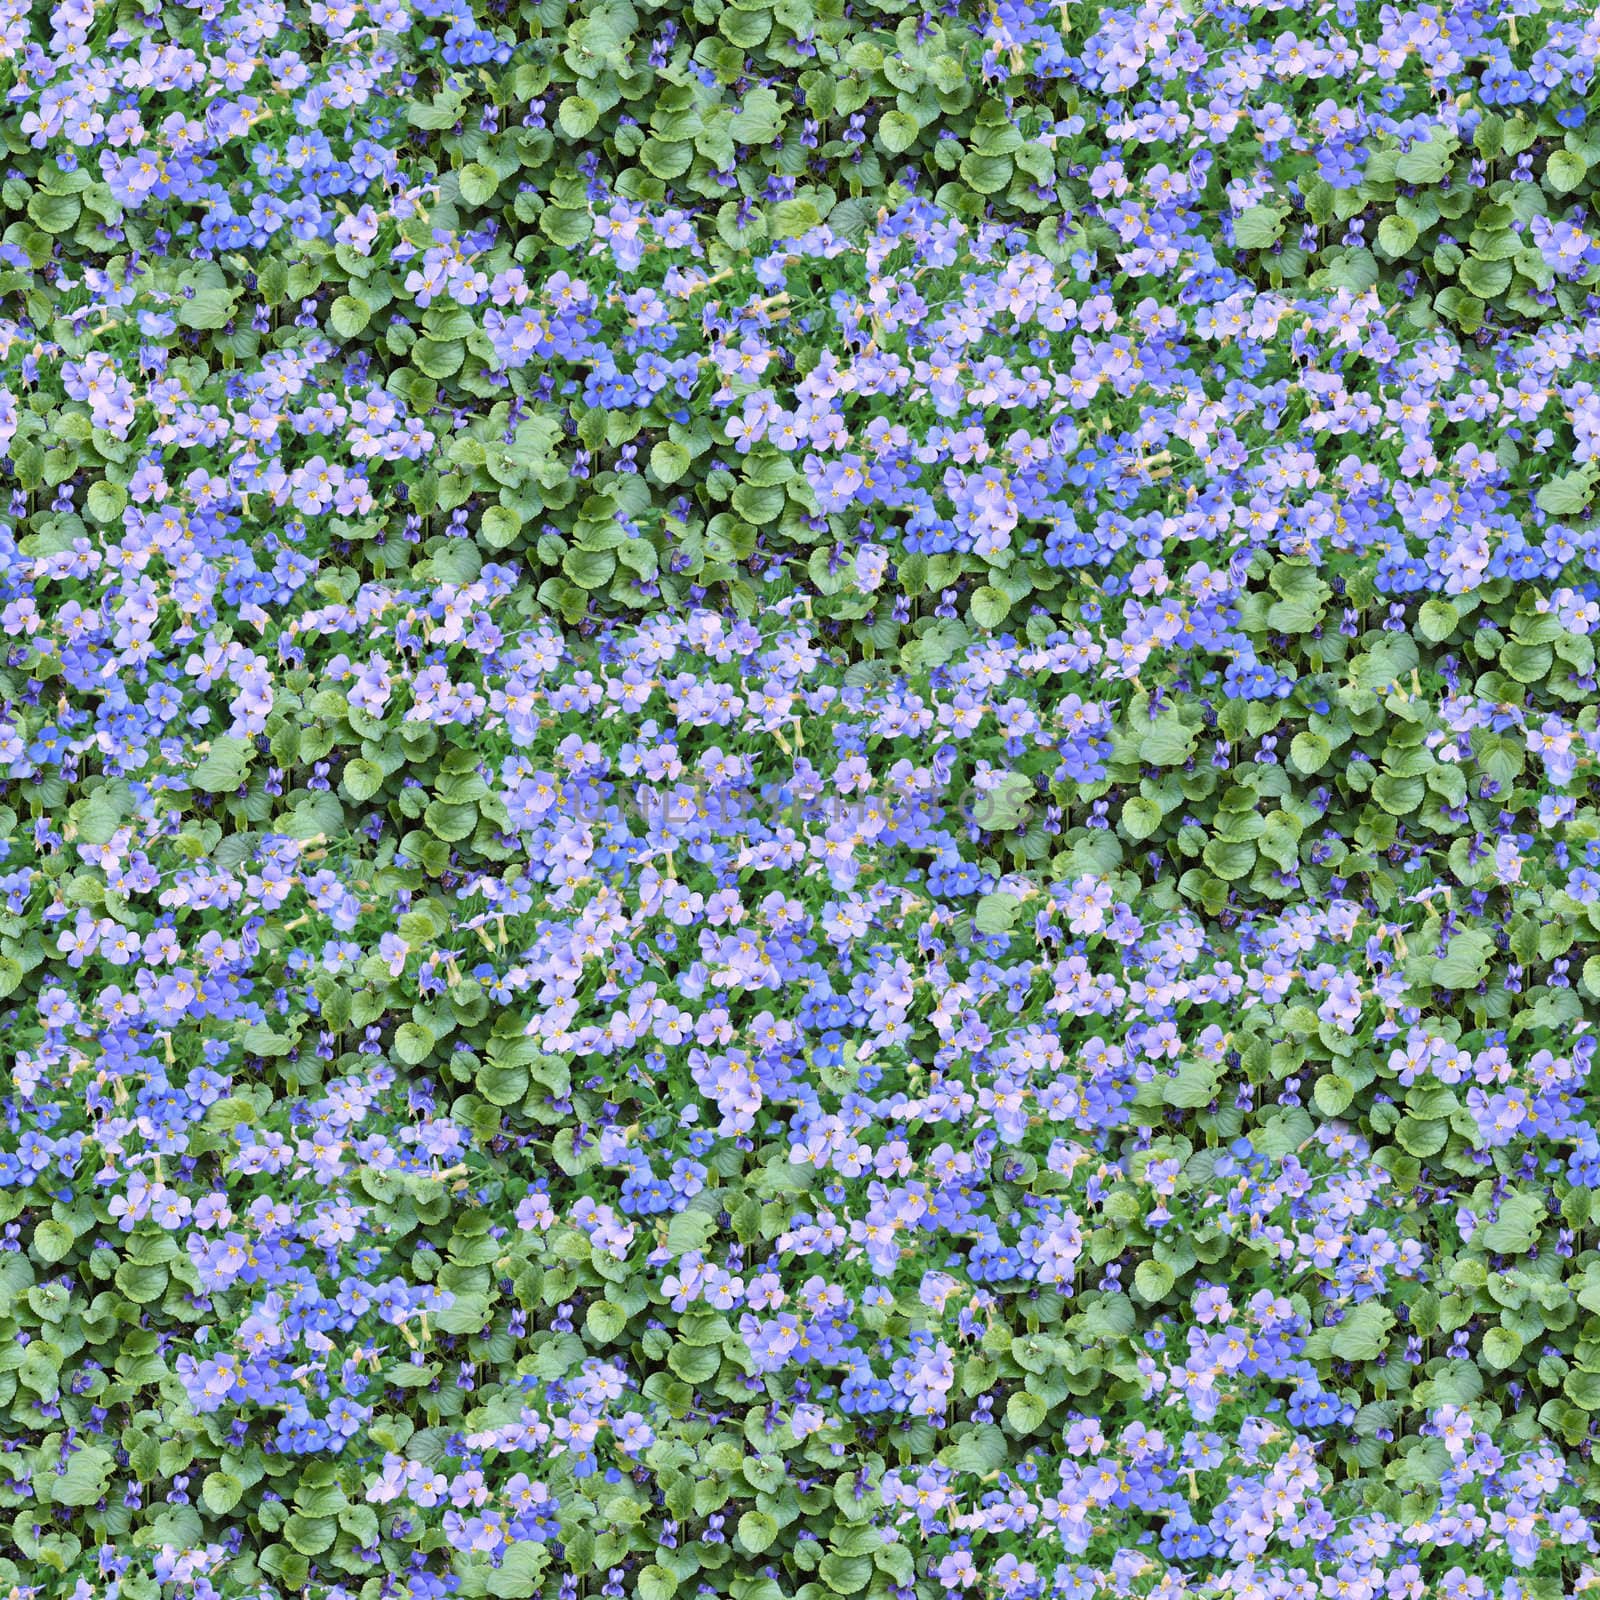 Aubrieta and violet seamless composable pattern by whitechild